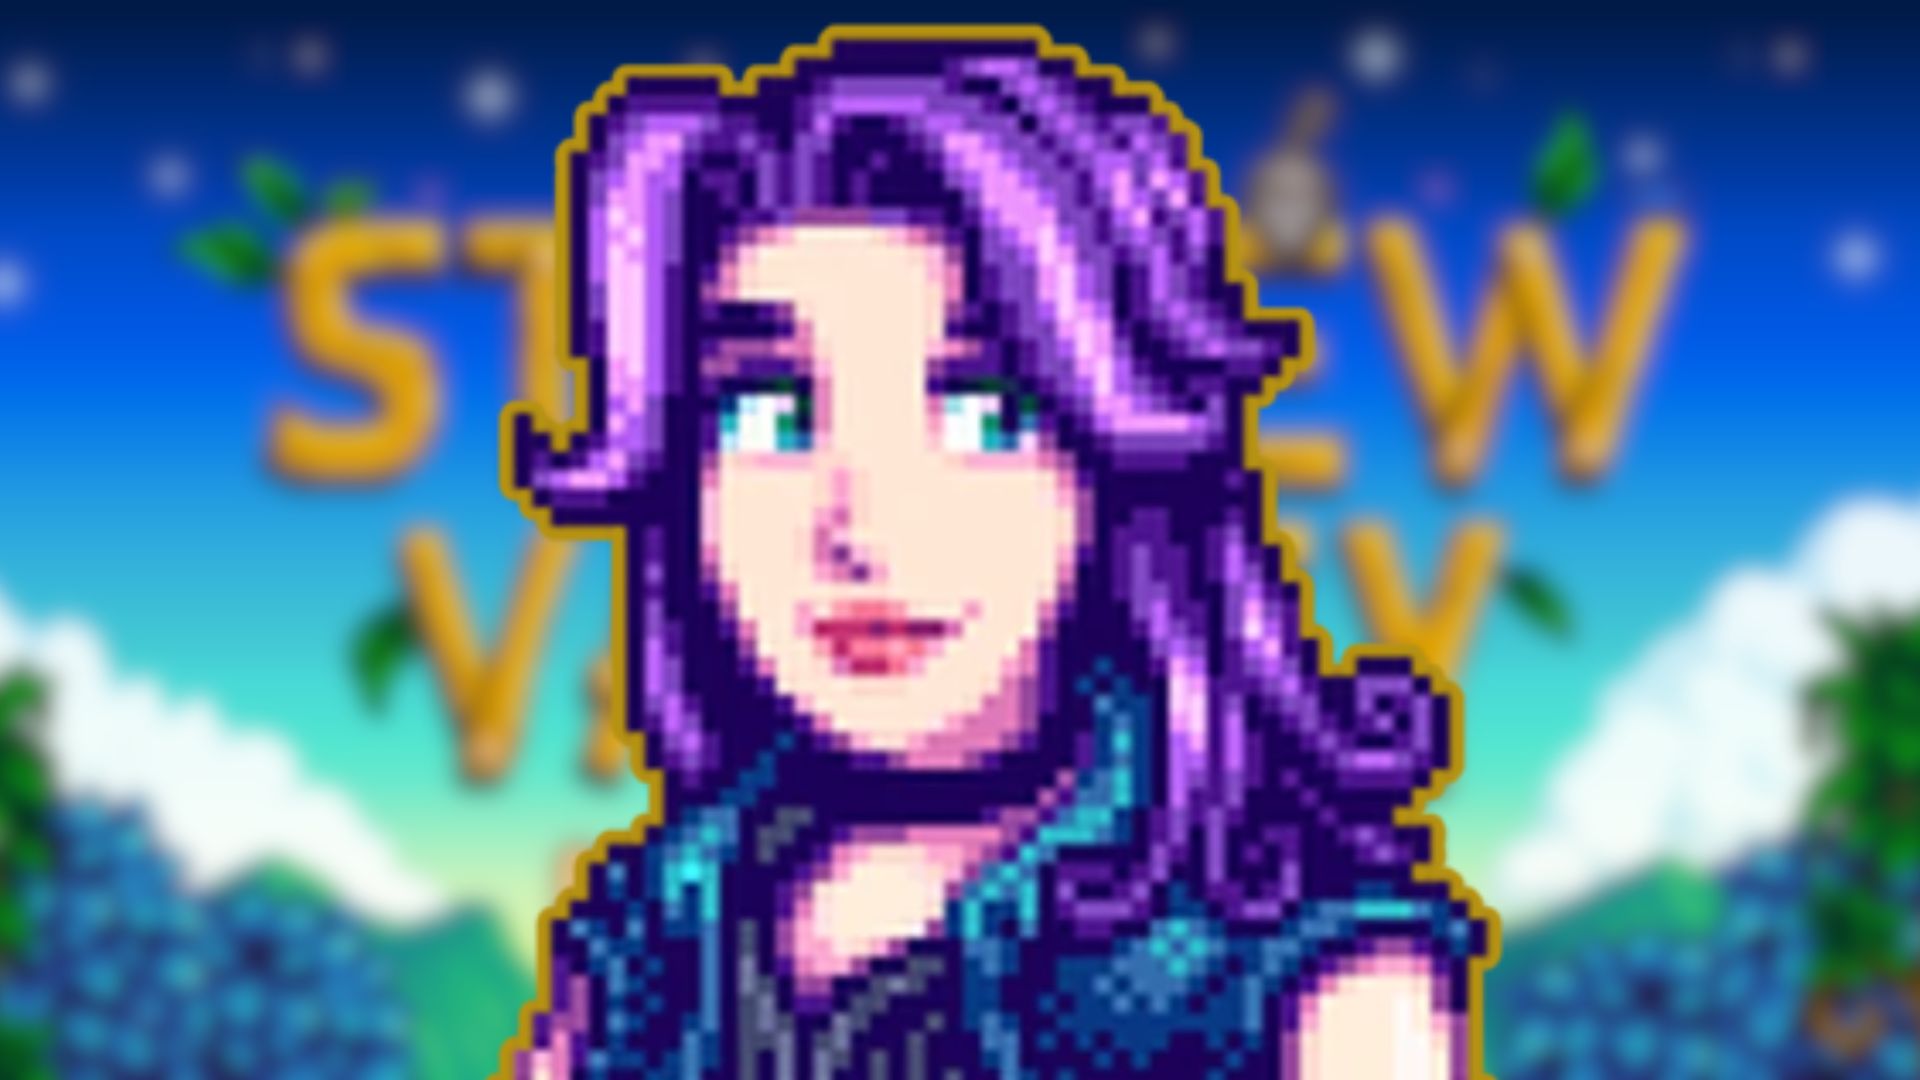 Stardew Valley 1.6 update is set to release on PC in March